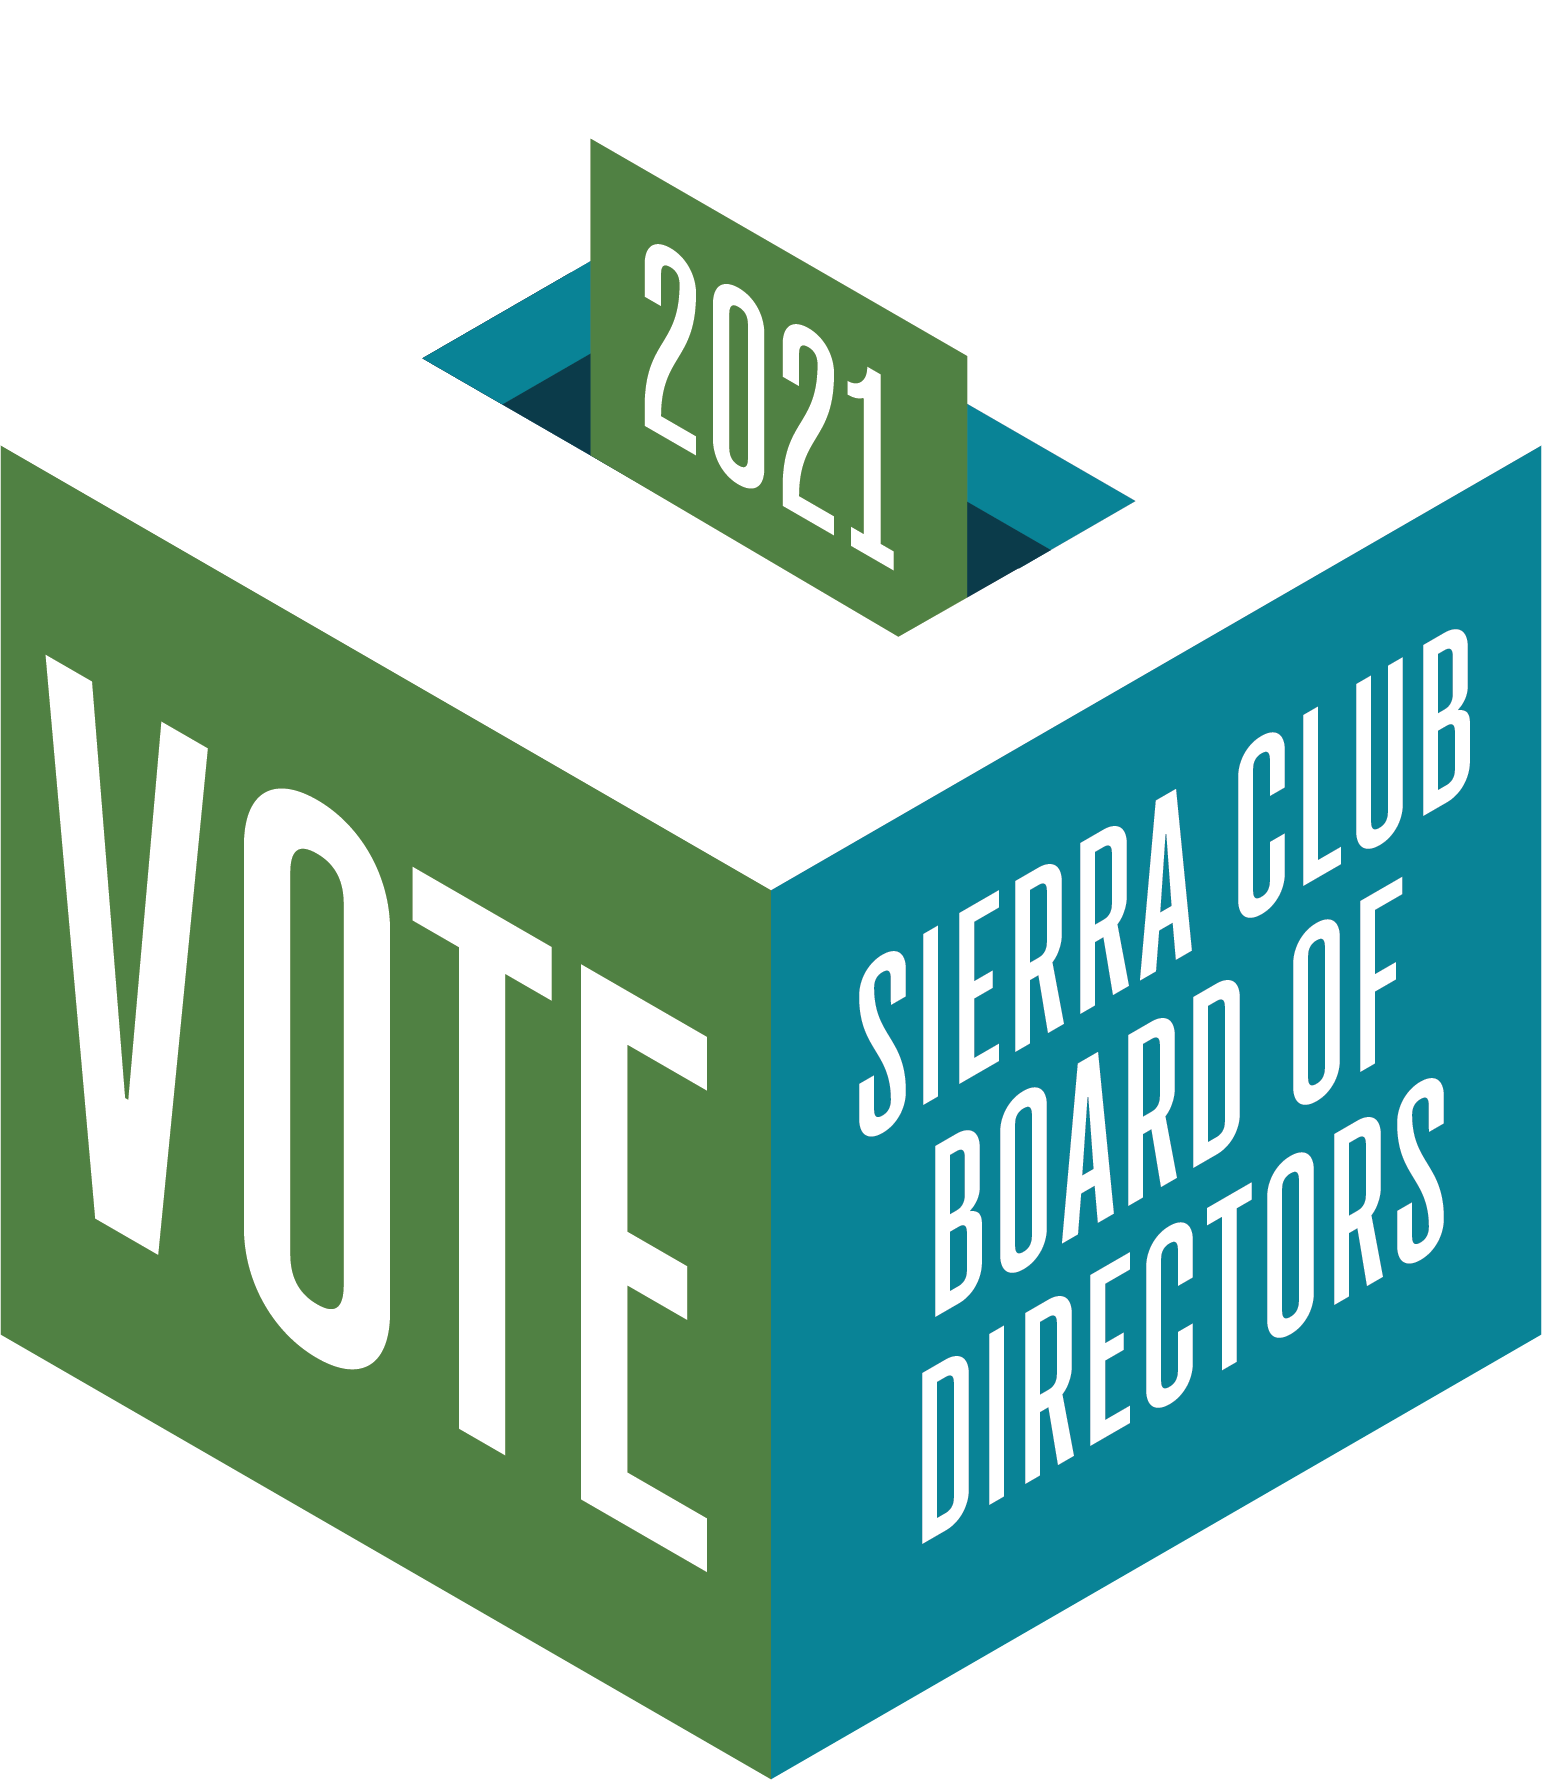 A graphic of a ballot box saying "VOTE" and "Sierra Club Board of Directors" on the sides of the box.